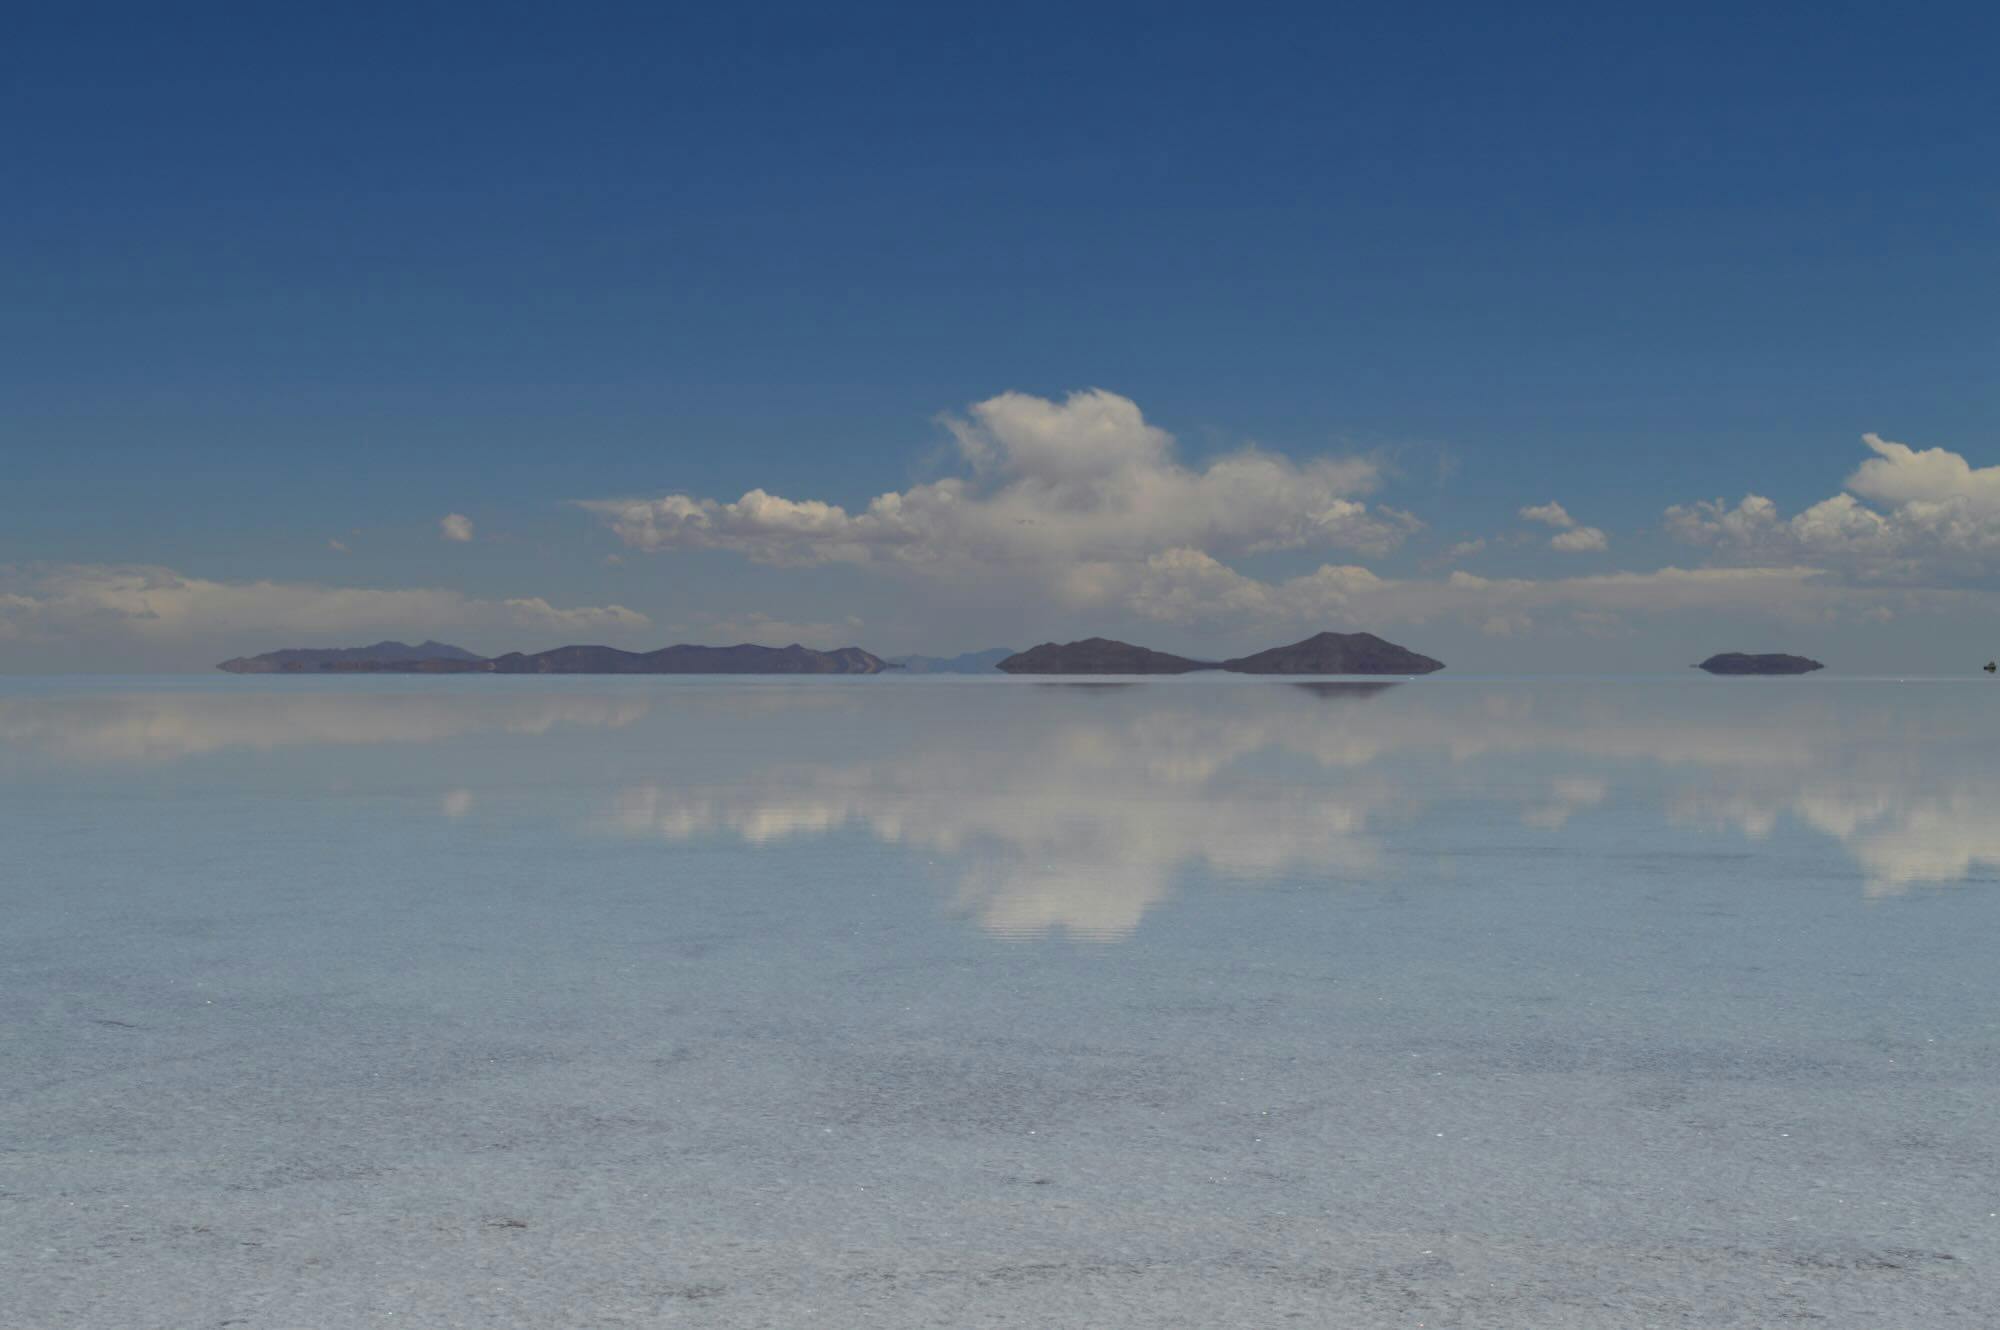 Hero image - Thin layer of water creates a glass mirror effect over the expansive Uyuni salt flats, Bolivia